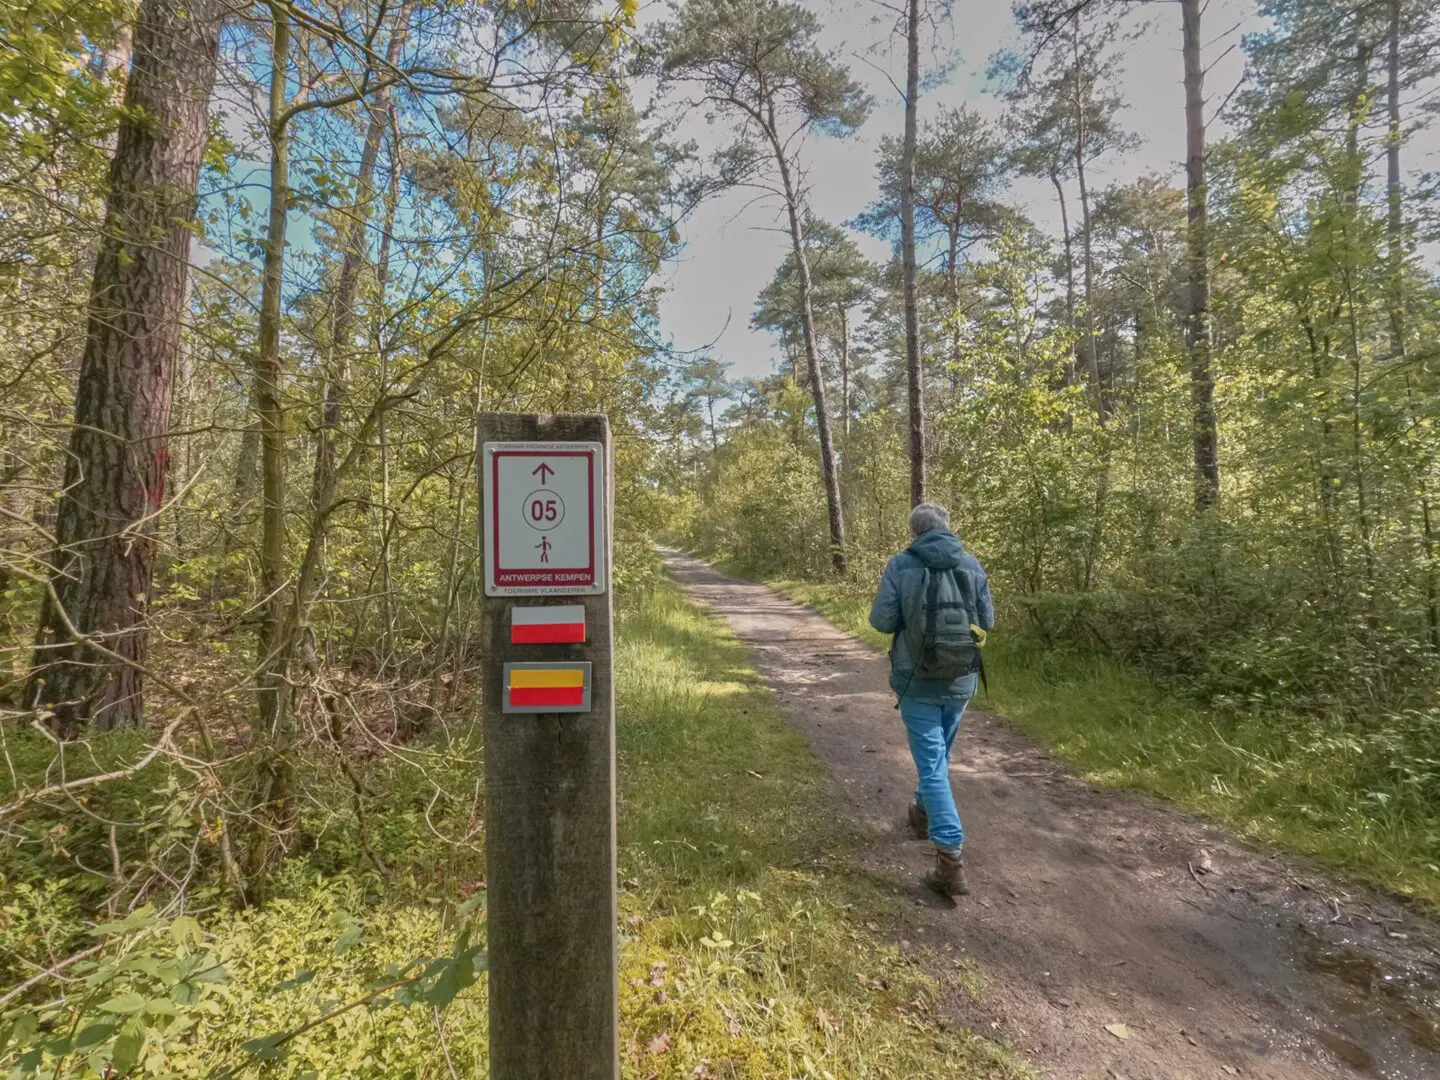 Person hiking on forest path with way sign in the foreground